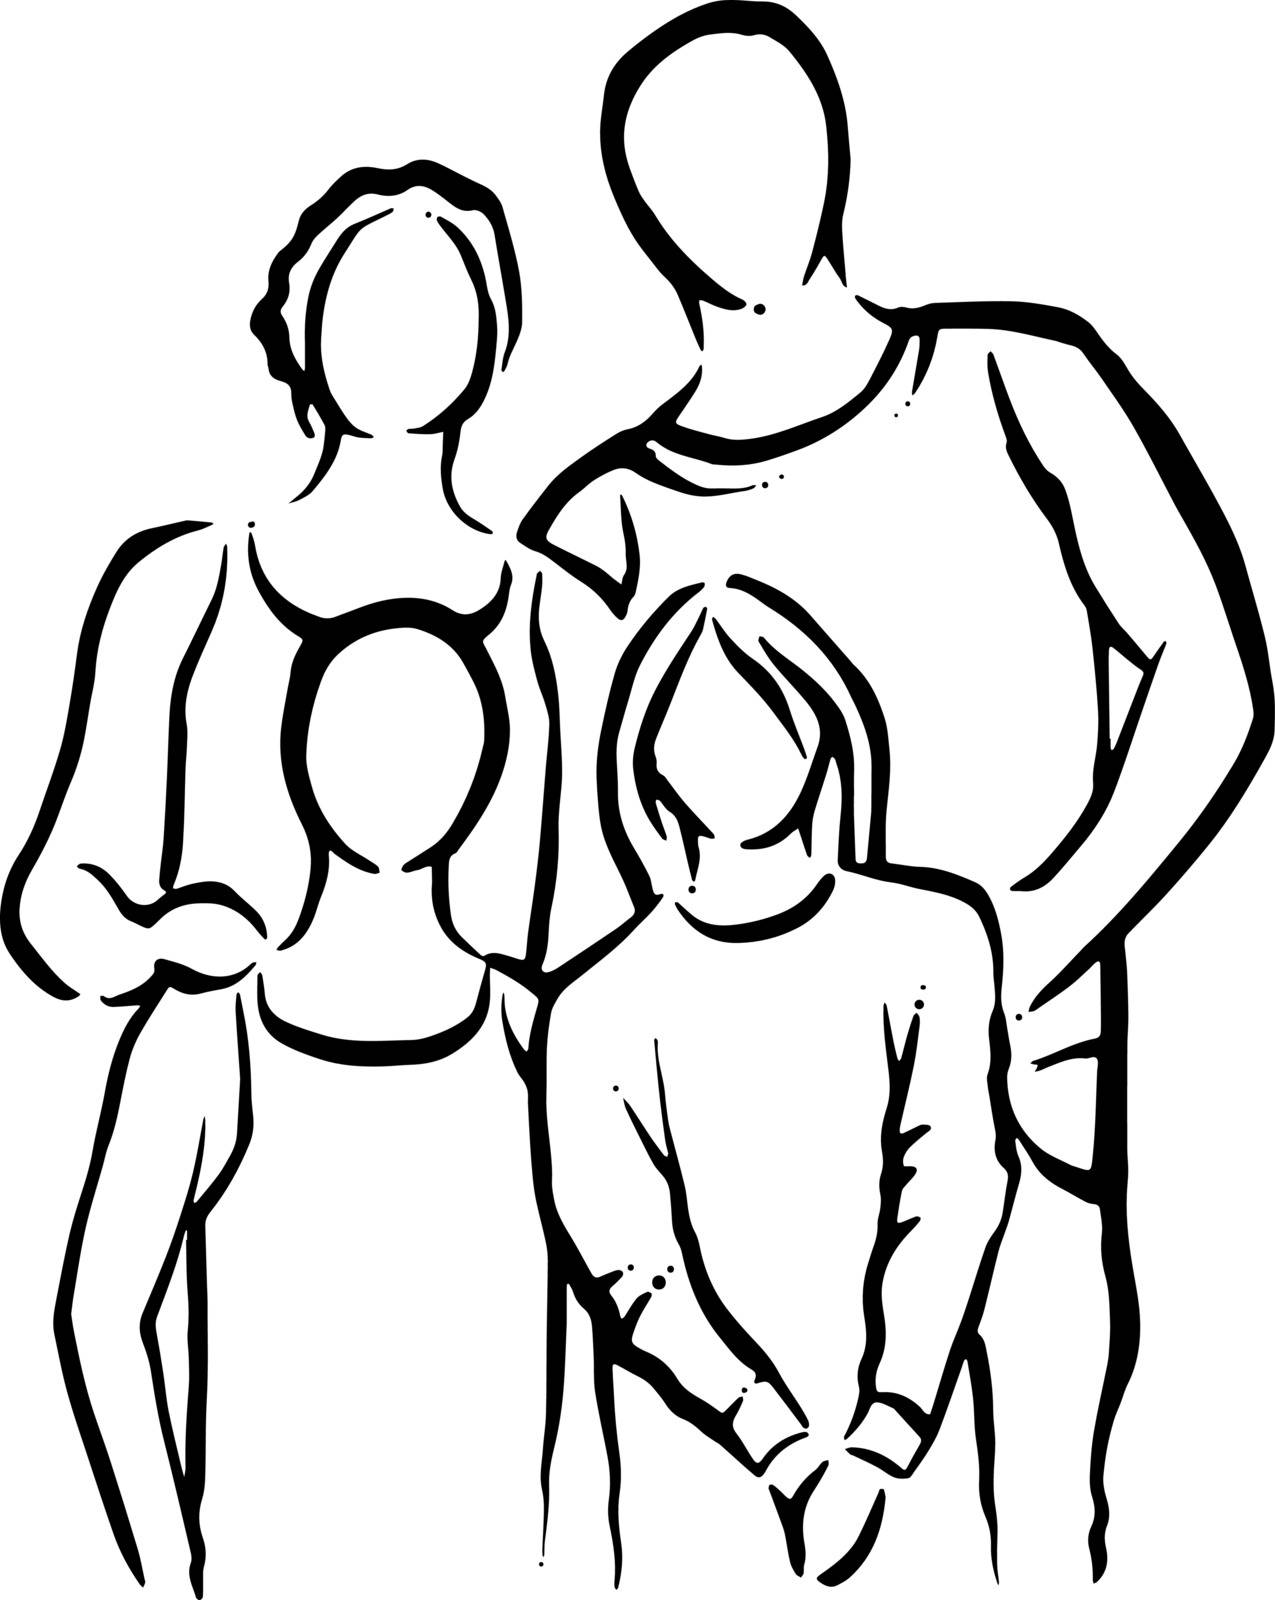 A husband and wife standing together, as a family, with their children.